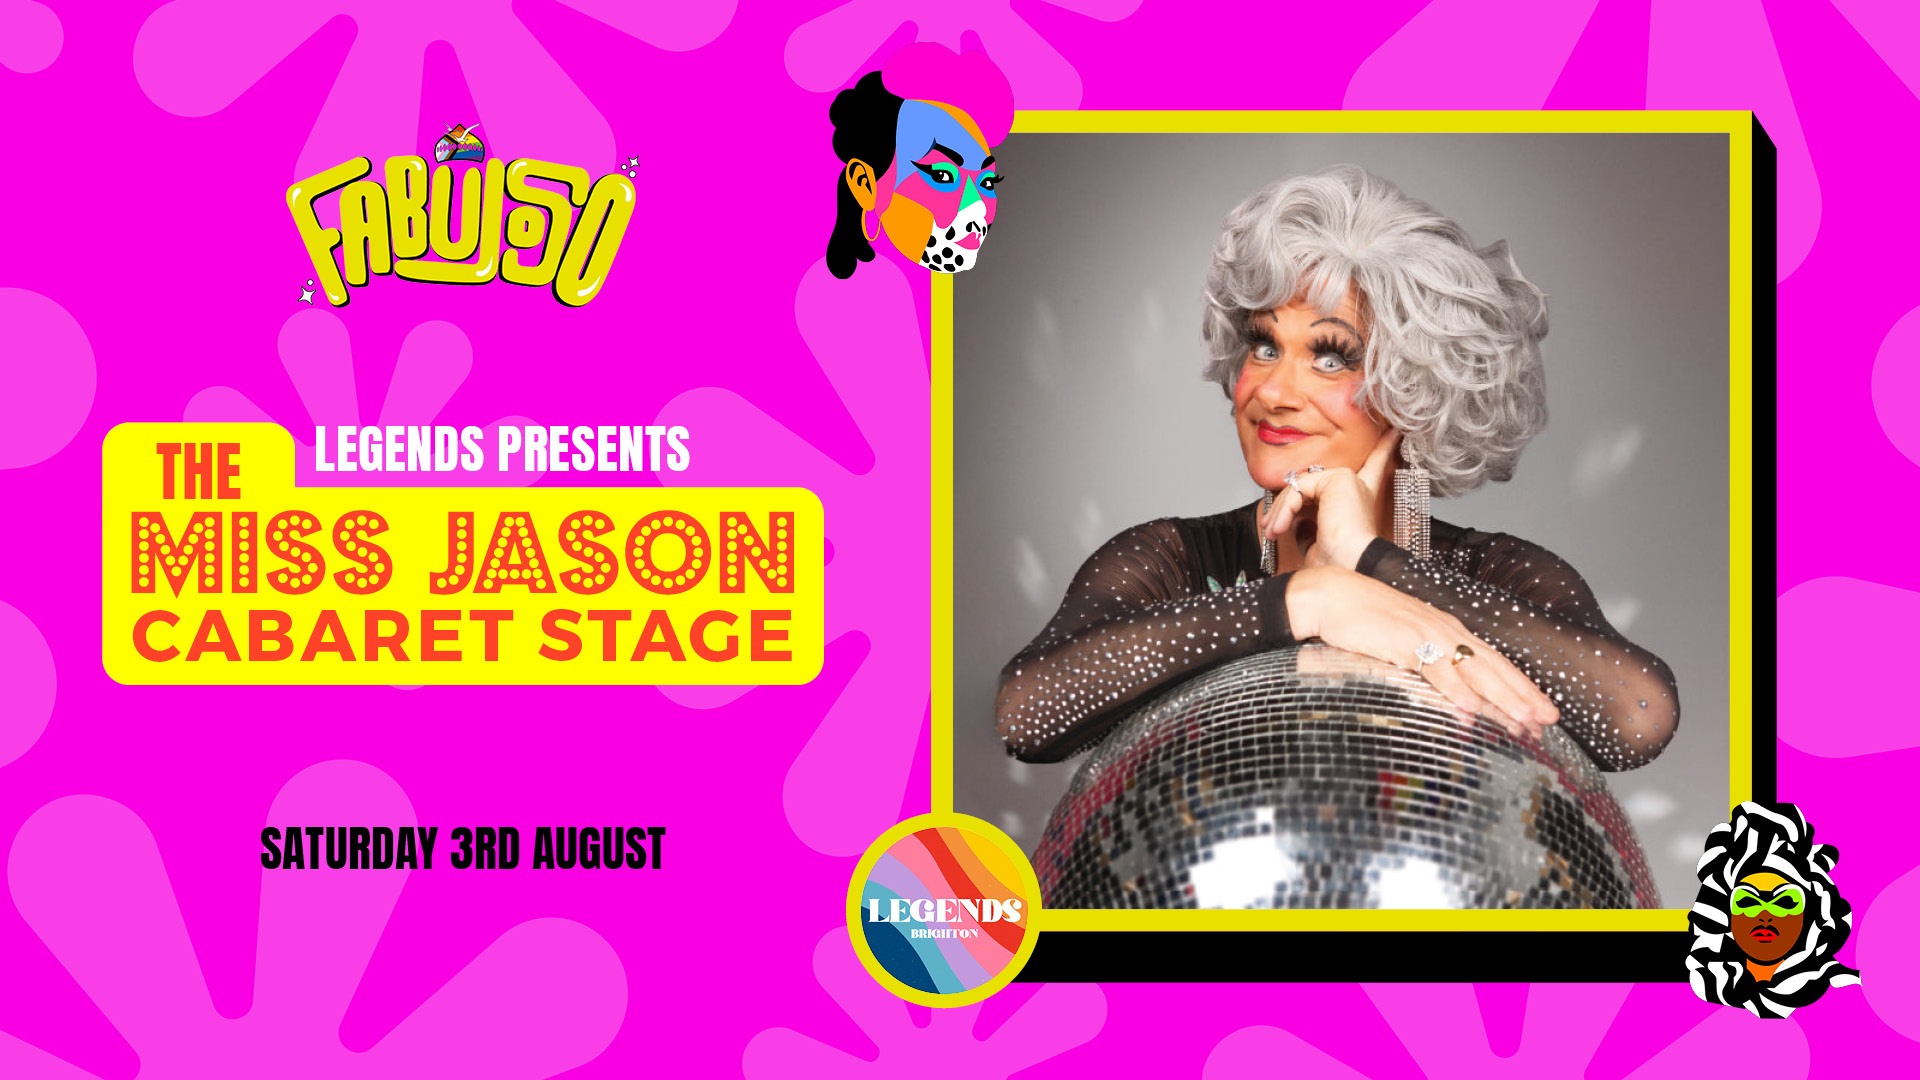 Brighton & Hove Pride to honour much-loved Jason Sutton with the Legends Presents The Miss Jason Cabaret Stage